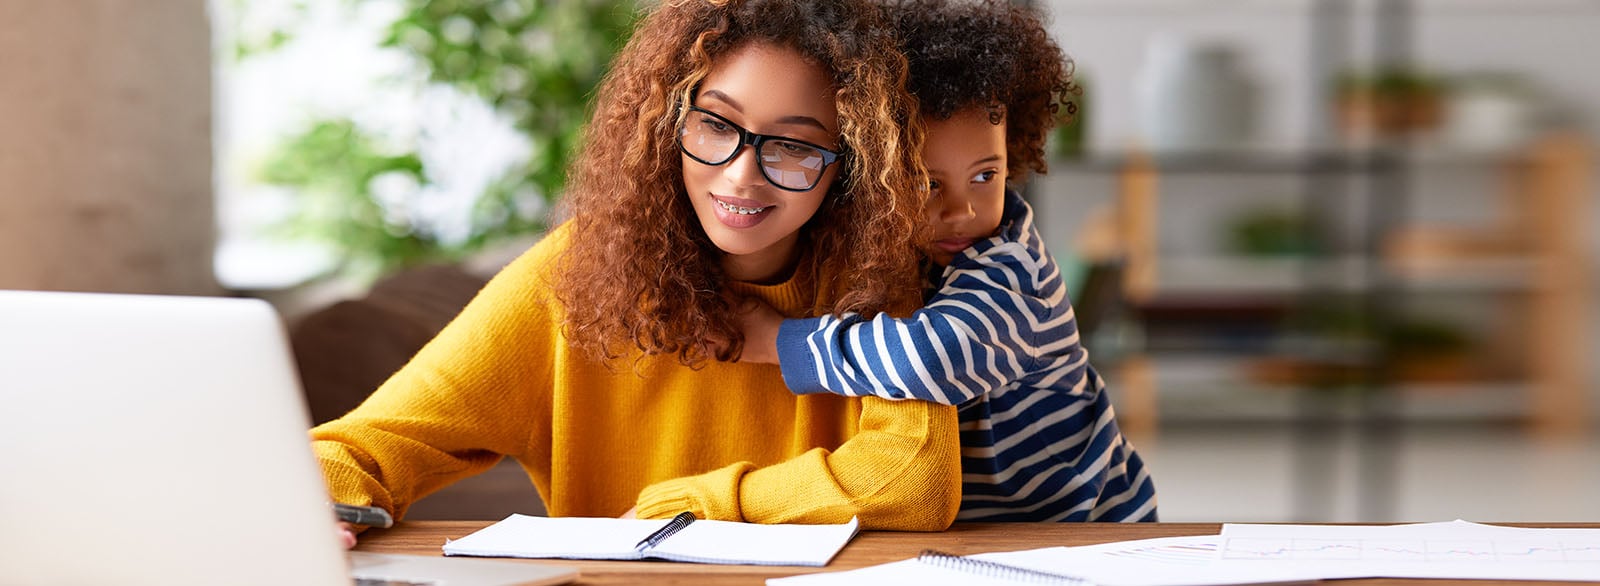 Young focused woman mother wearing eyeglasses using laptop and thinking about work task while small boy son gently hugs her.